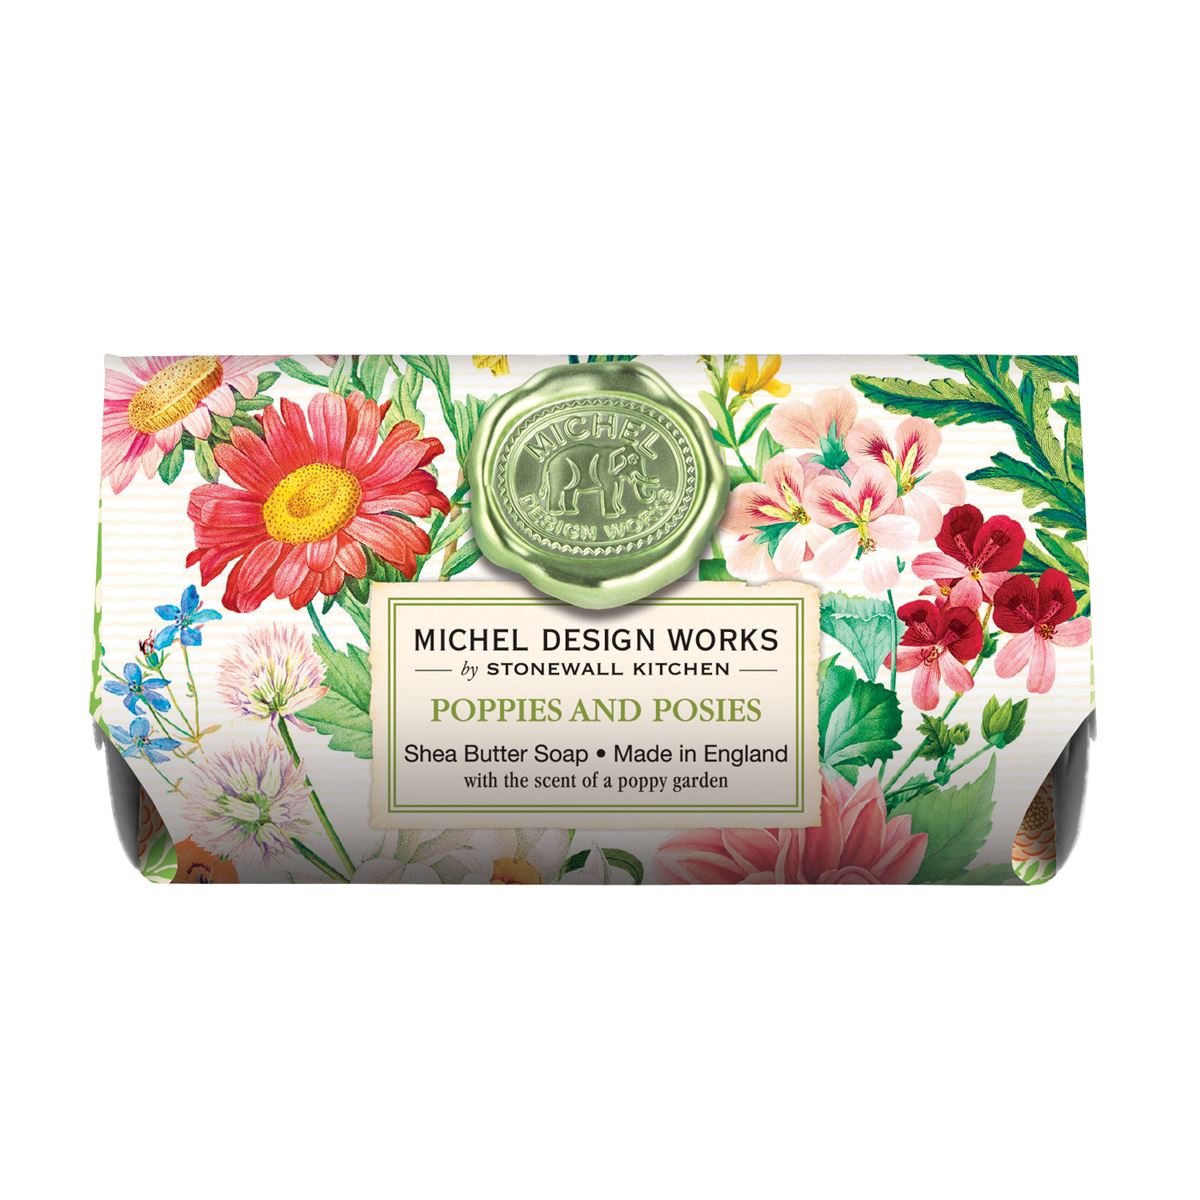 Michel Design Works - Poppies and Posies Large Bath Soap Bar